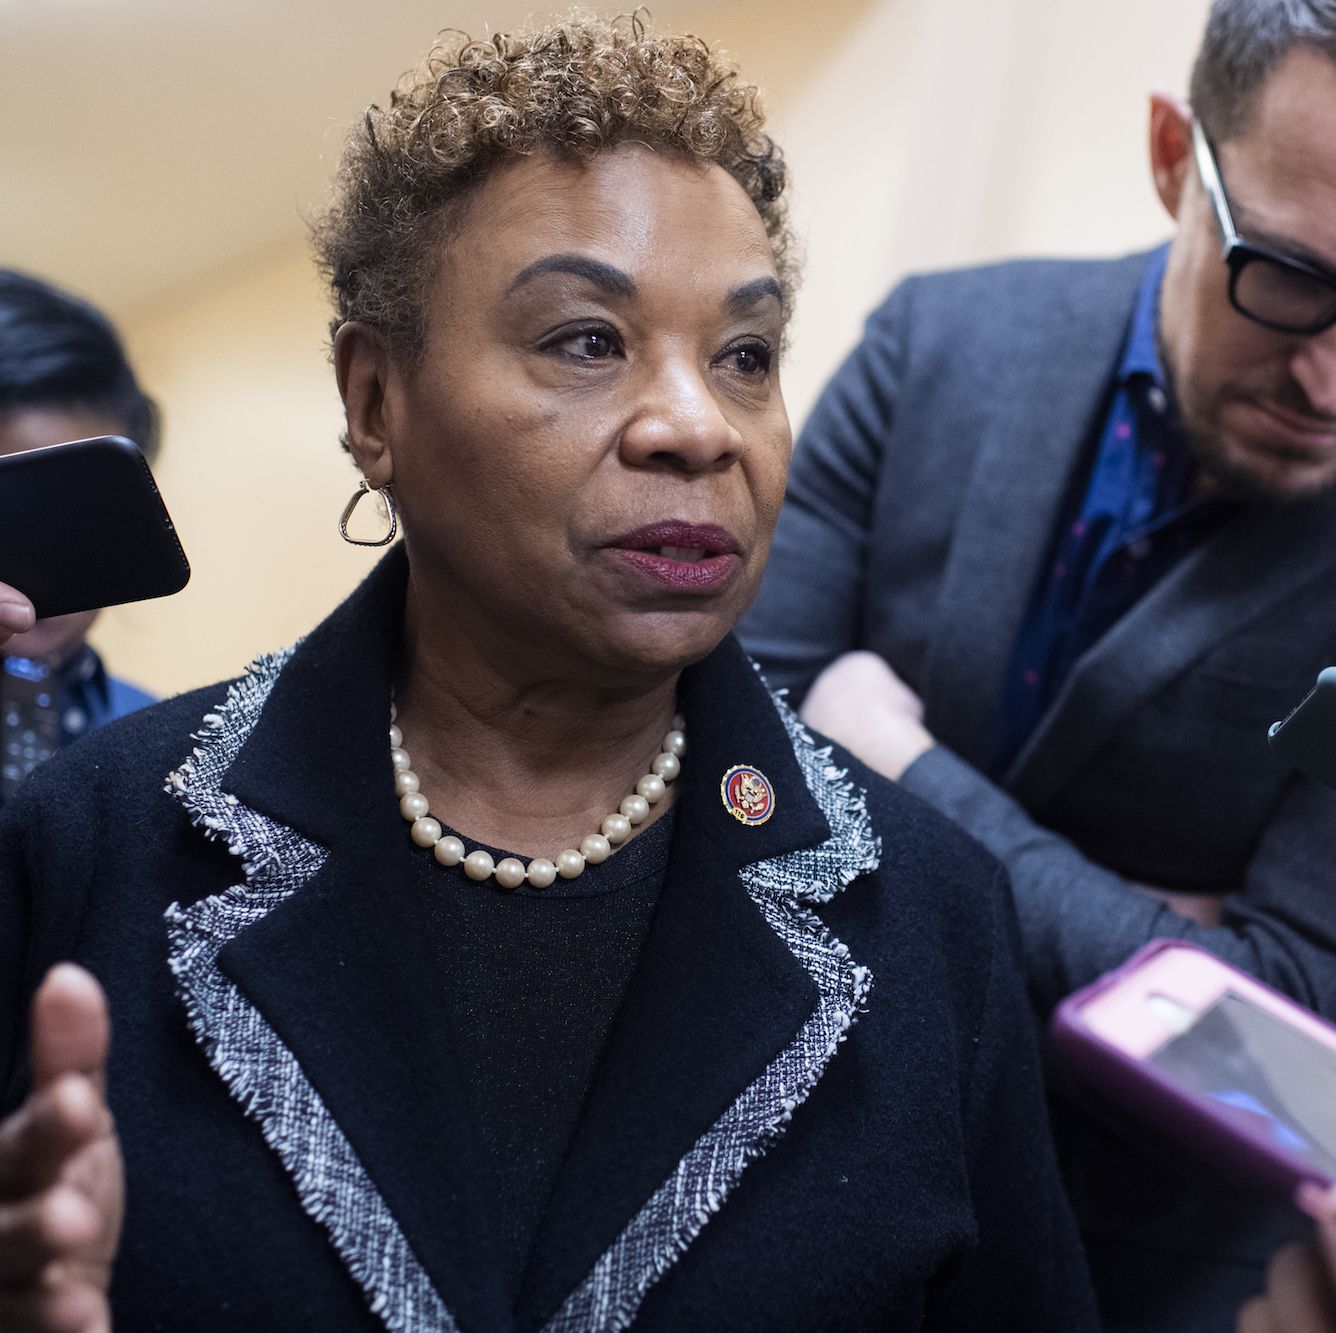 Barbara Lee Was Right About Afghanistan in 2001. We Should Listen To Her Now.